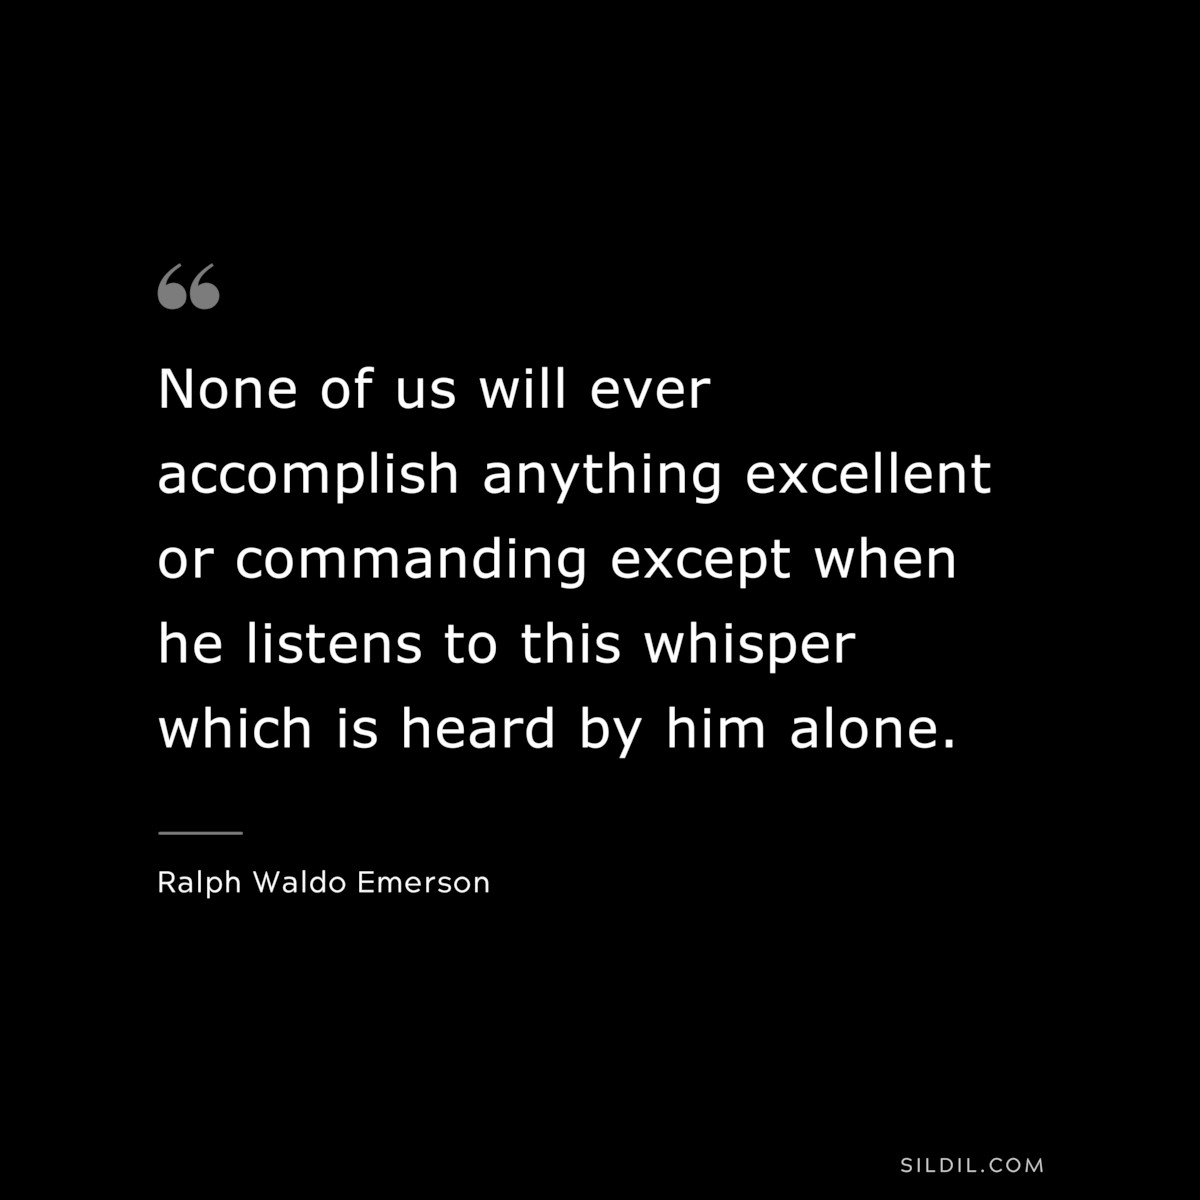  None of us will ever accomplish anything excellent or commanding except when he listens to this whisper which is heard by him alone.  — Ralph Waldo Emerson